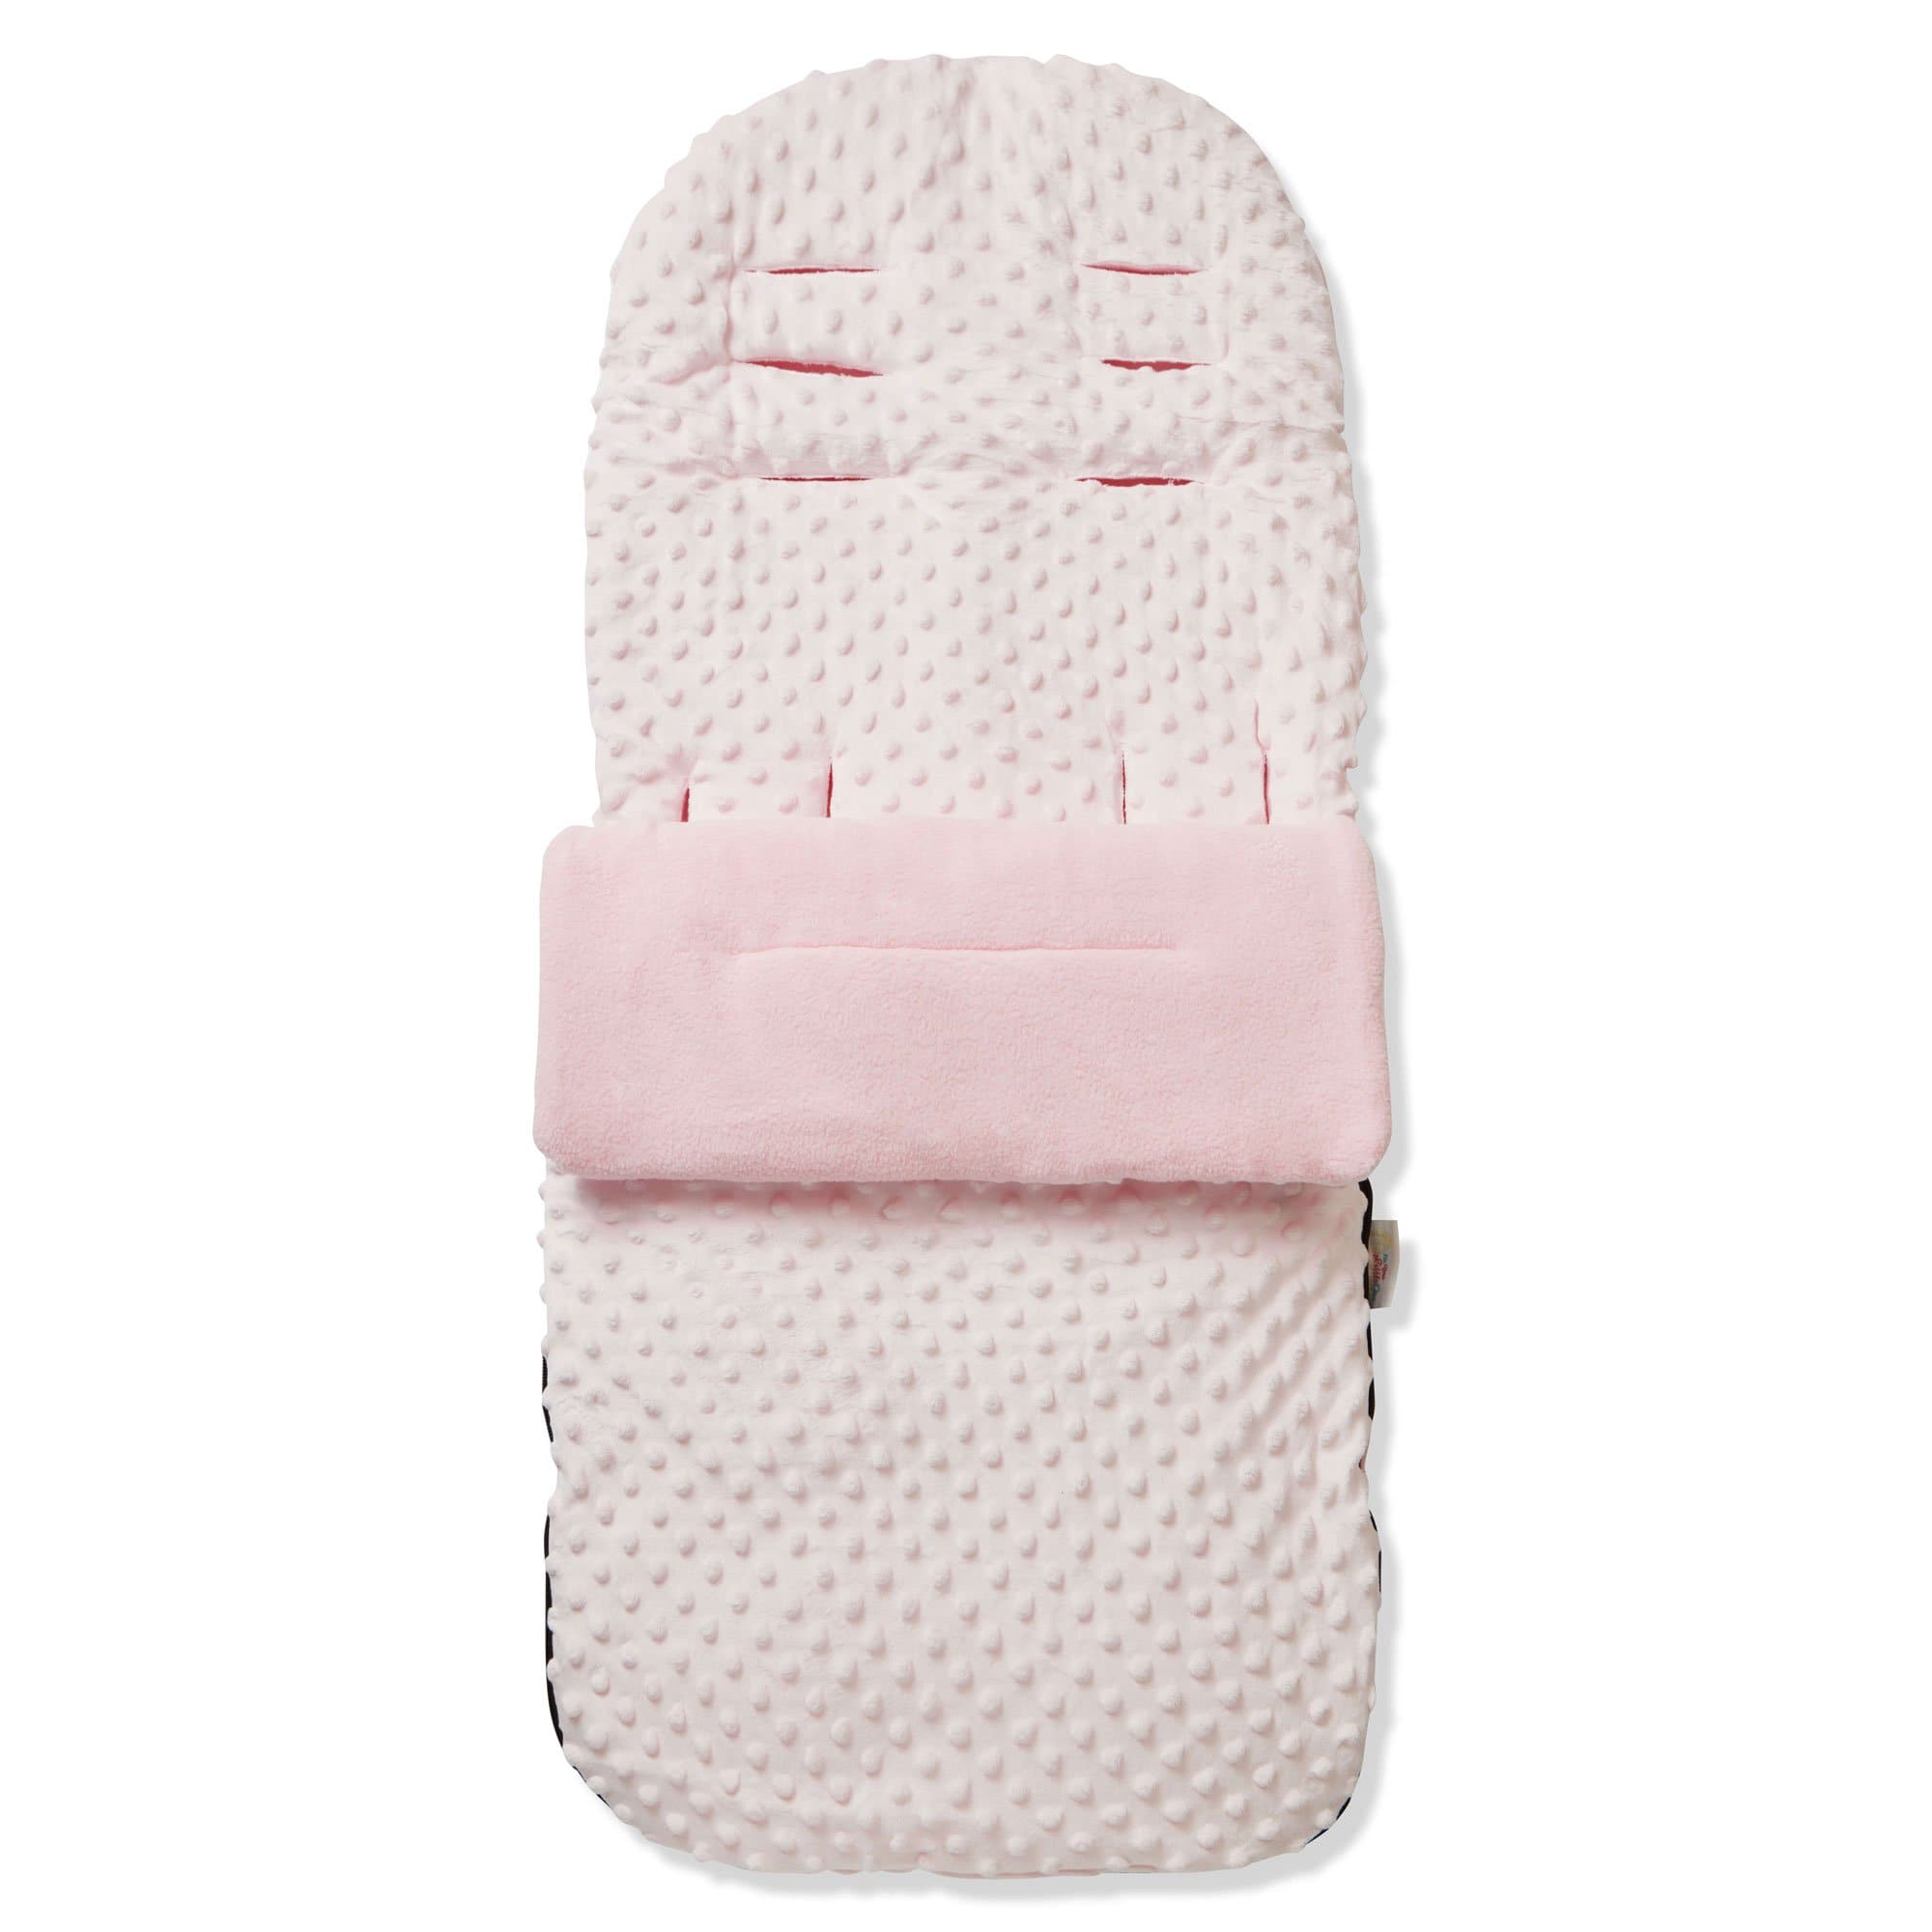 Dimple Footmuff / Cosy Toes Compatible with Hauck - Pink / Fits All Models | For Your Little One